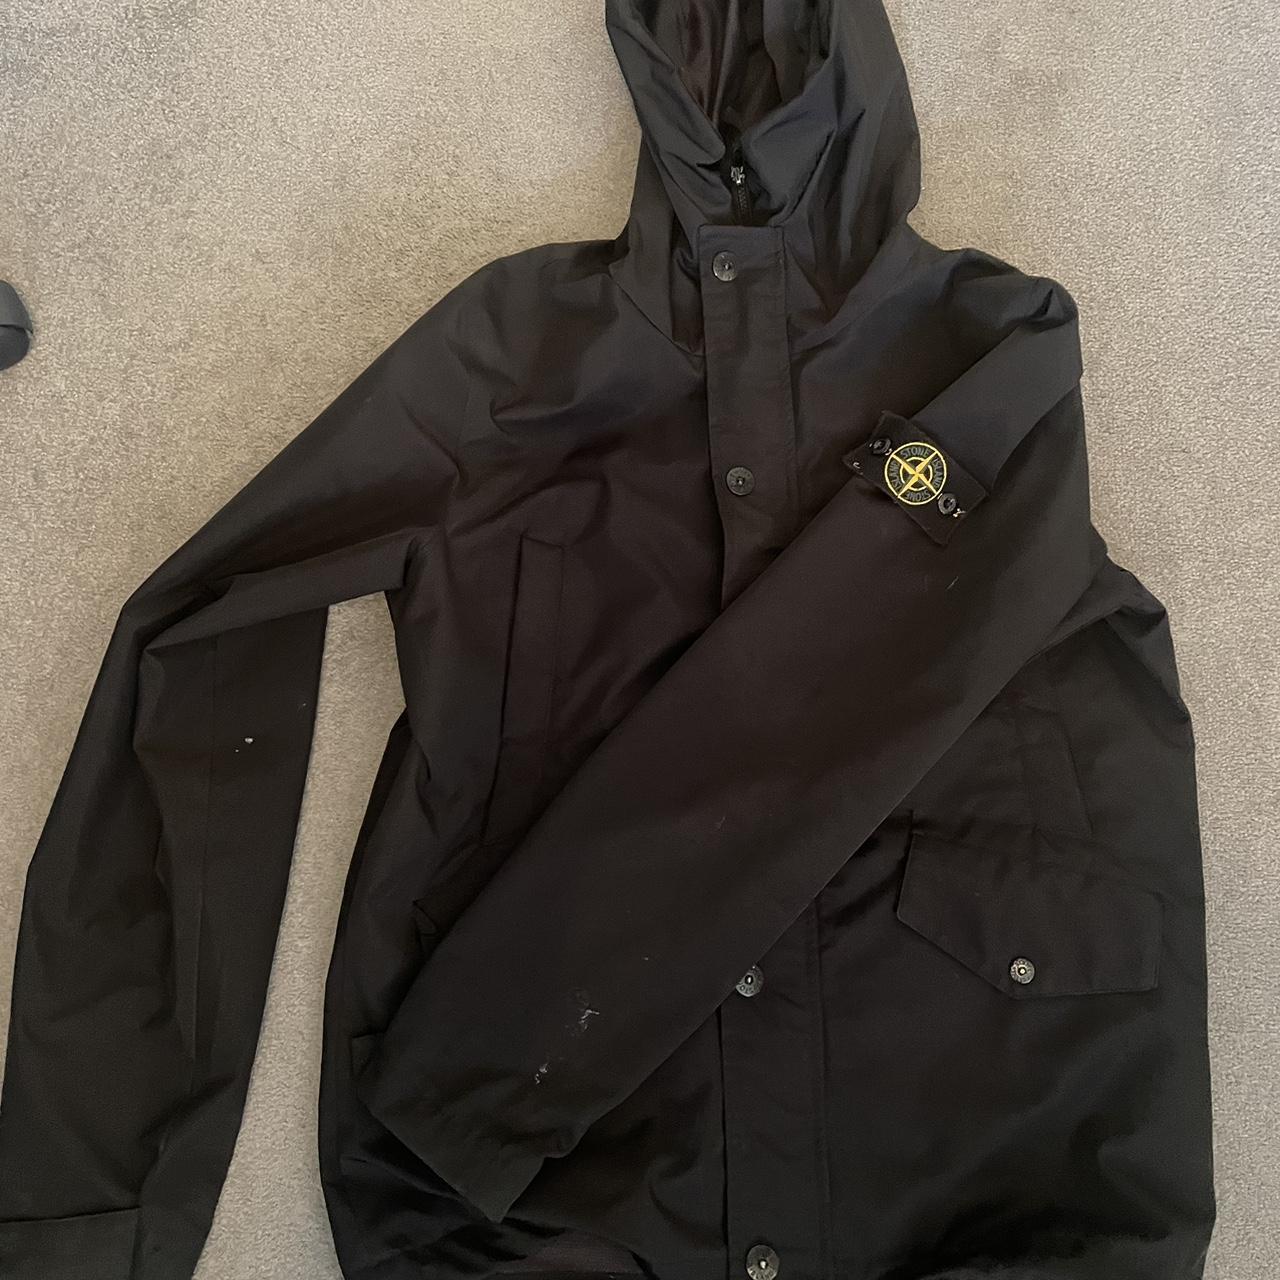 Stone island coat Dont know much about it Size:... - Depop